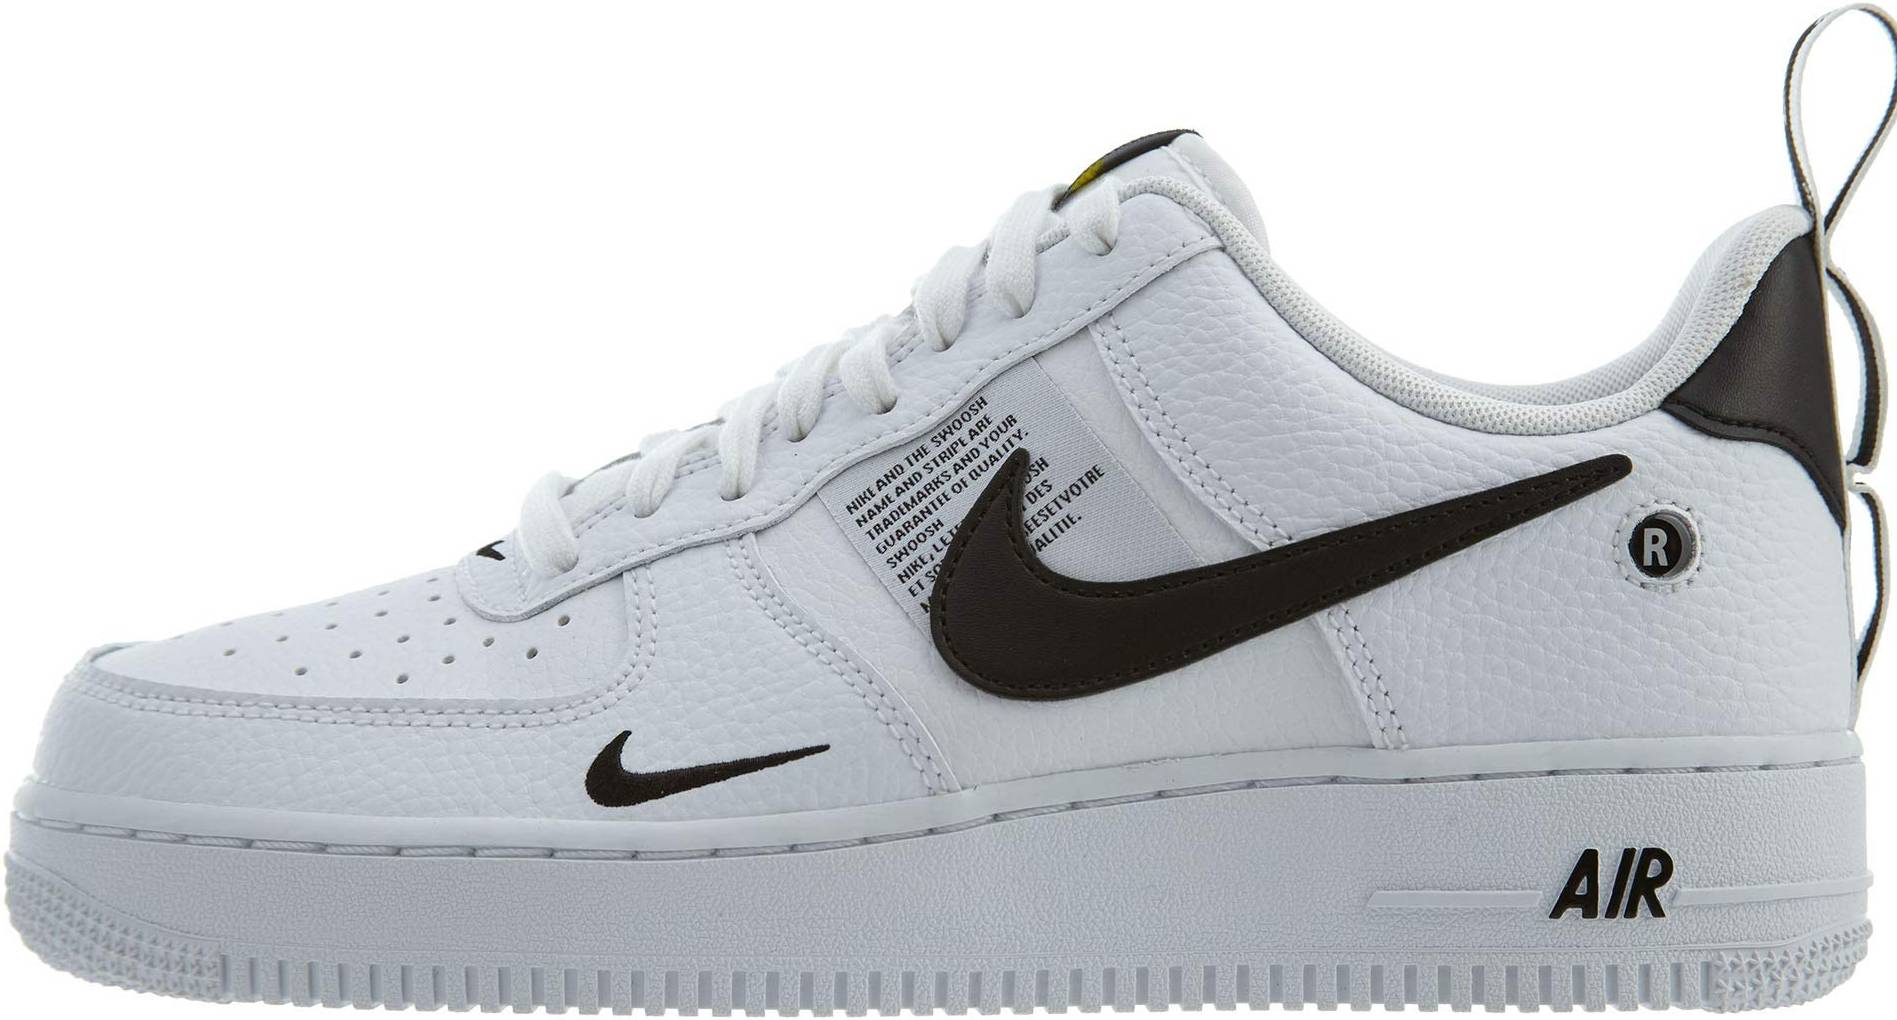 Bare Italian retail Nike Air Force 1 07 LV8 Utility sneakers in 5 colors (only $89) | RunRepeat